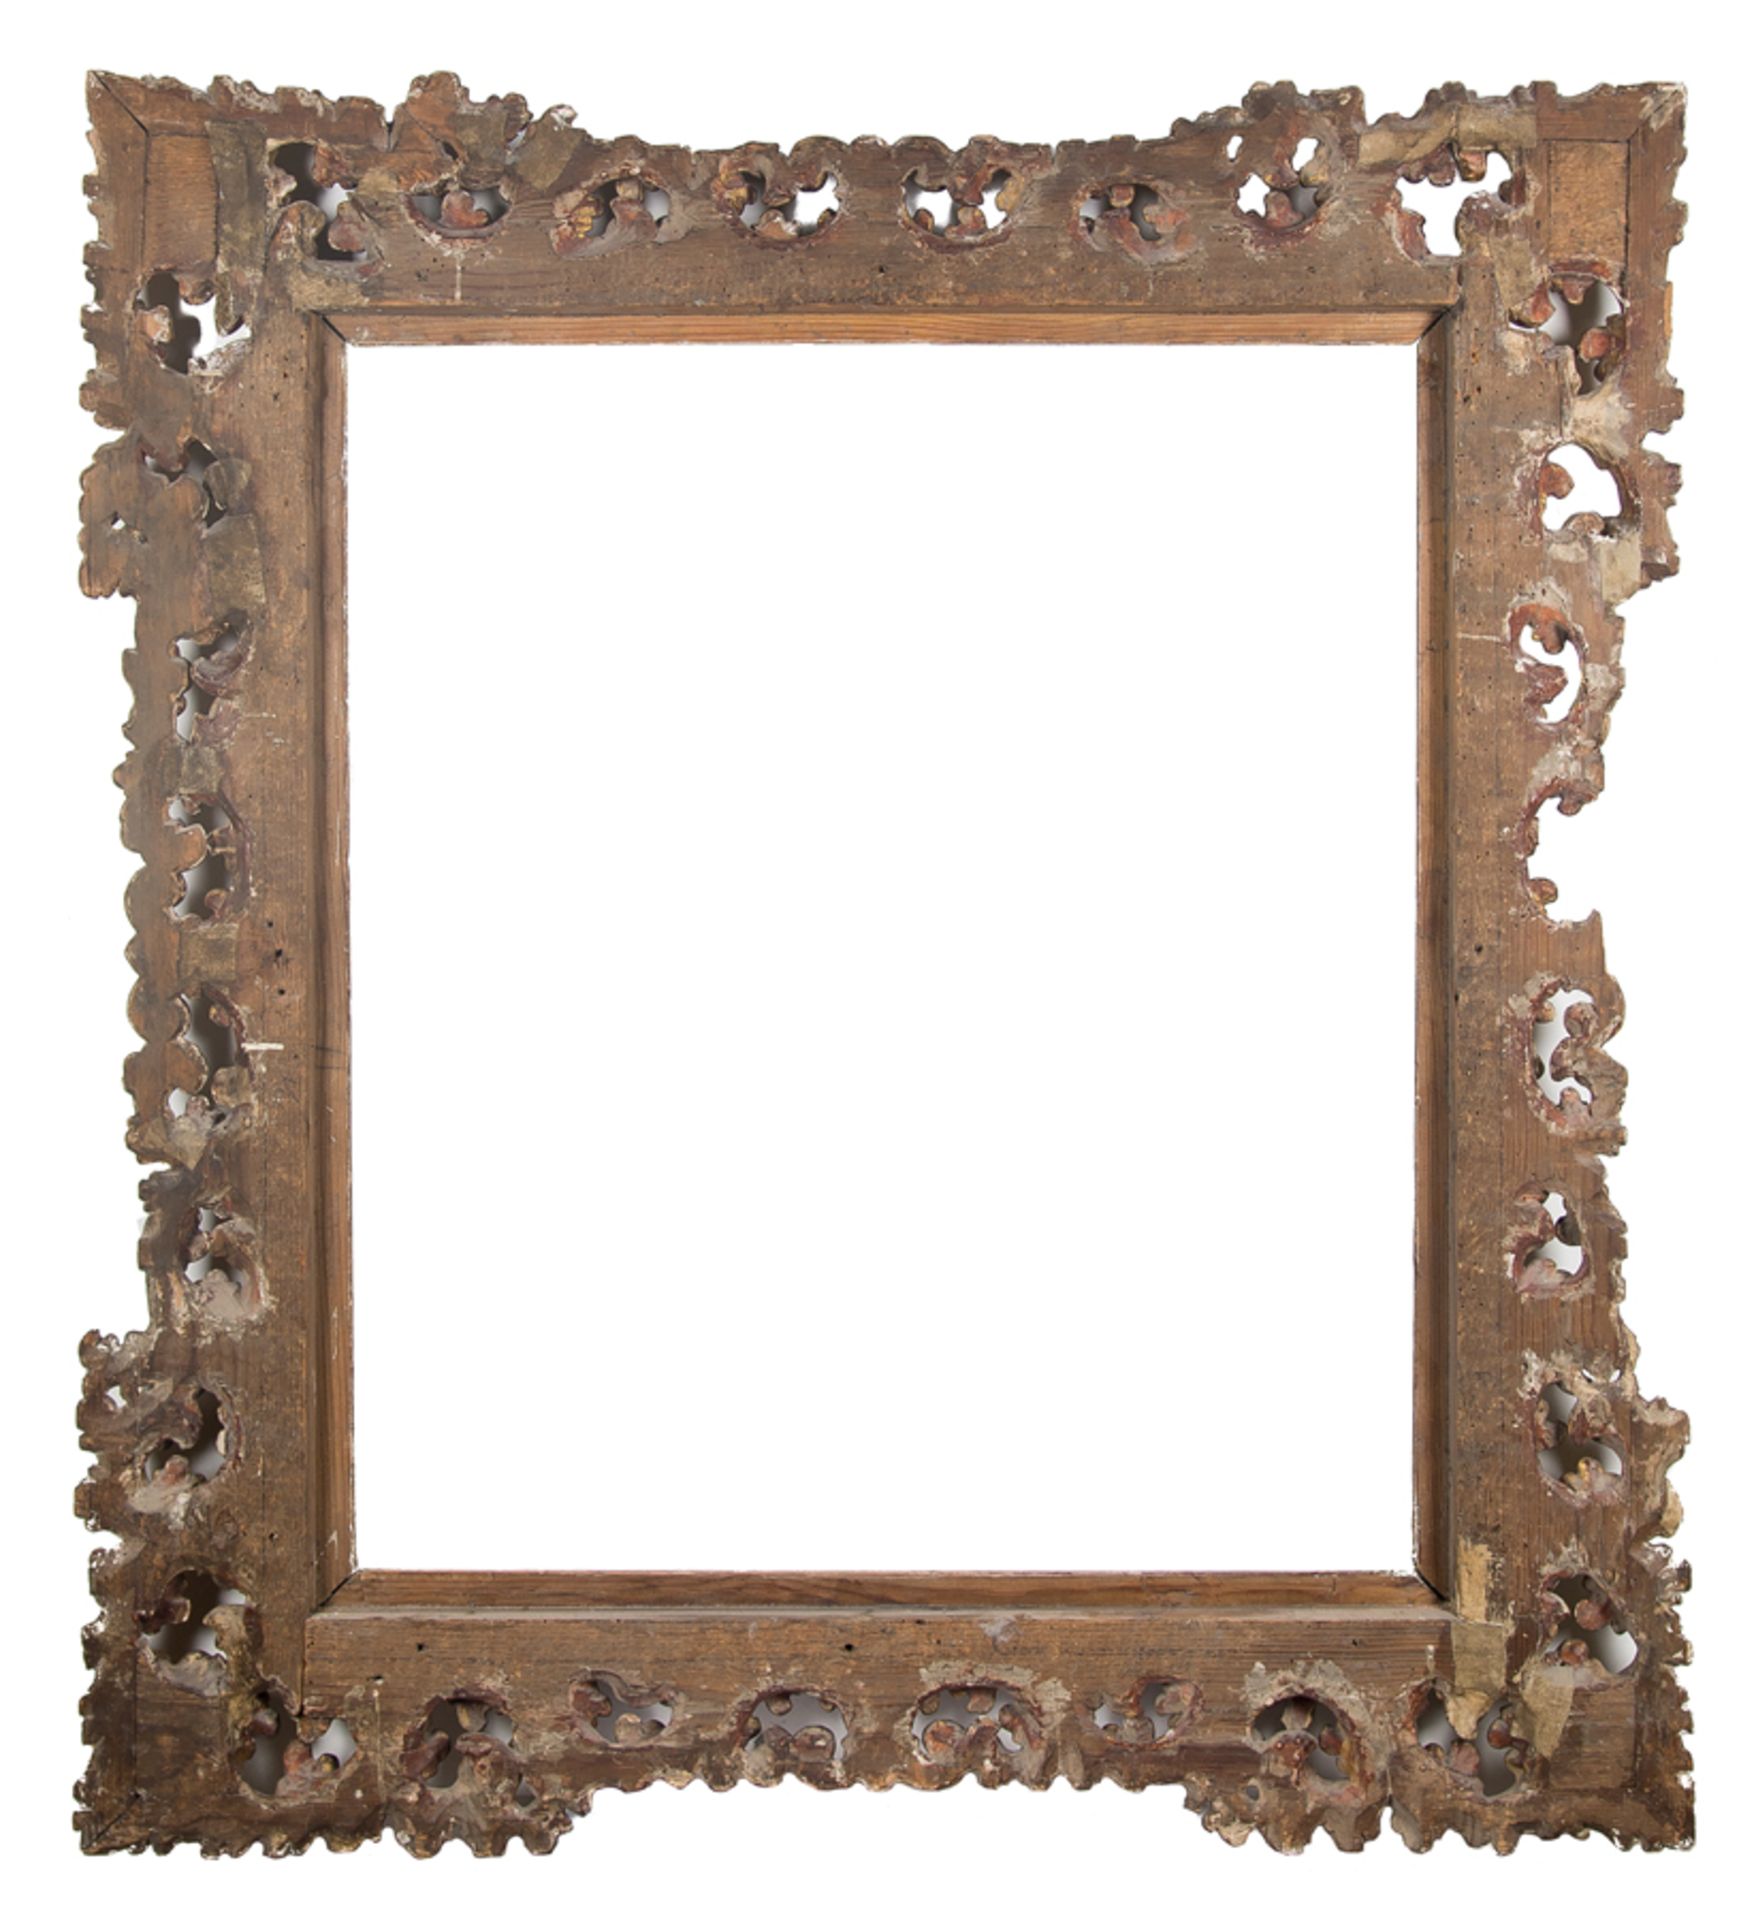 Carved and gilded wooden frame. Italian work. 17th - 18th century. - Bild 4 aus 4